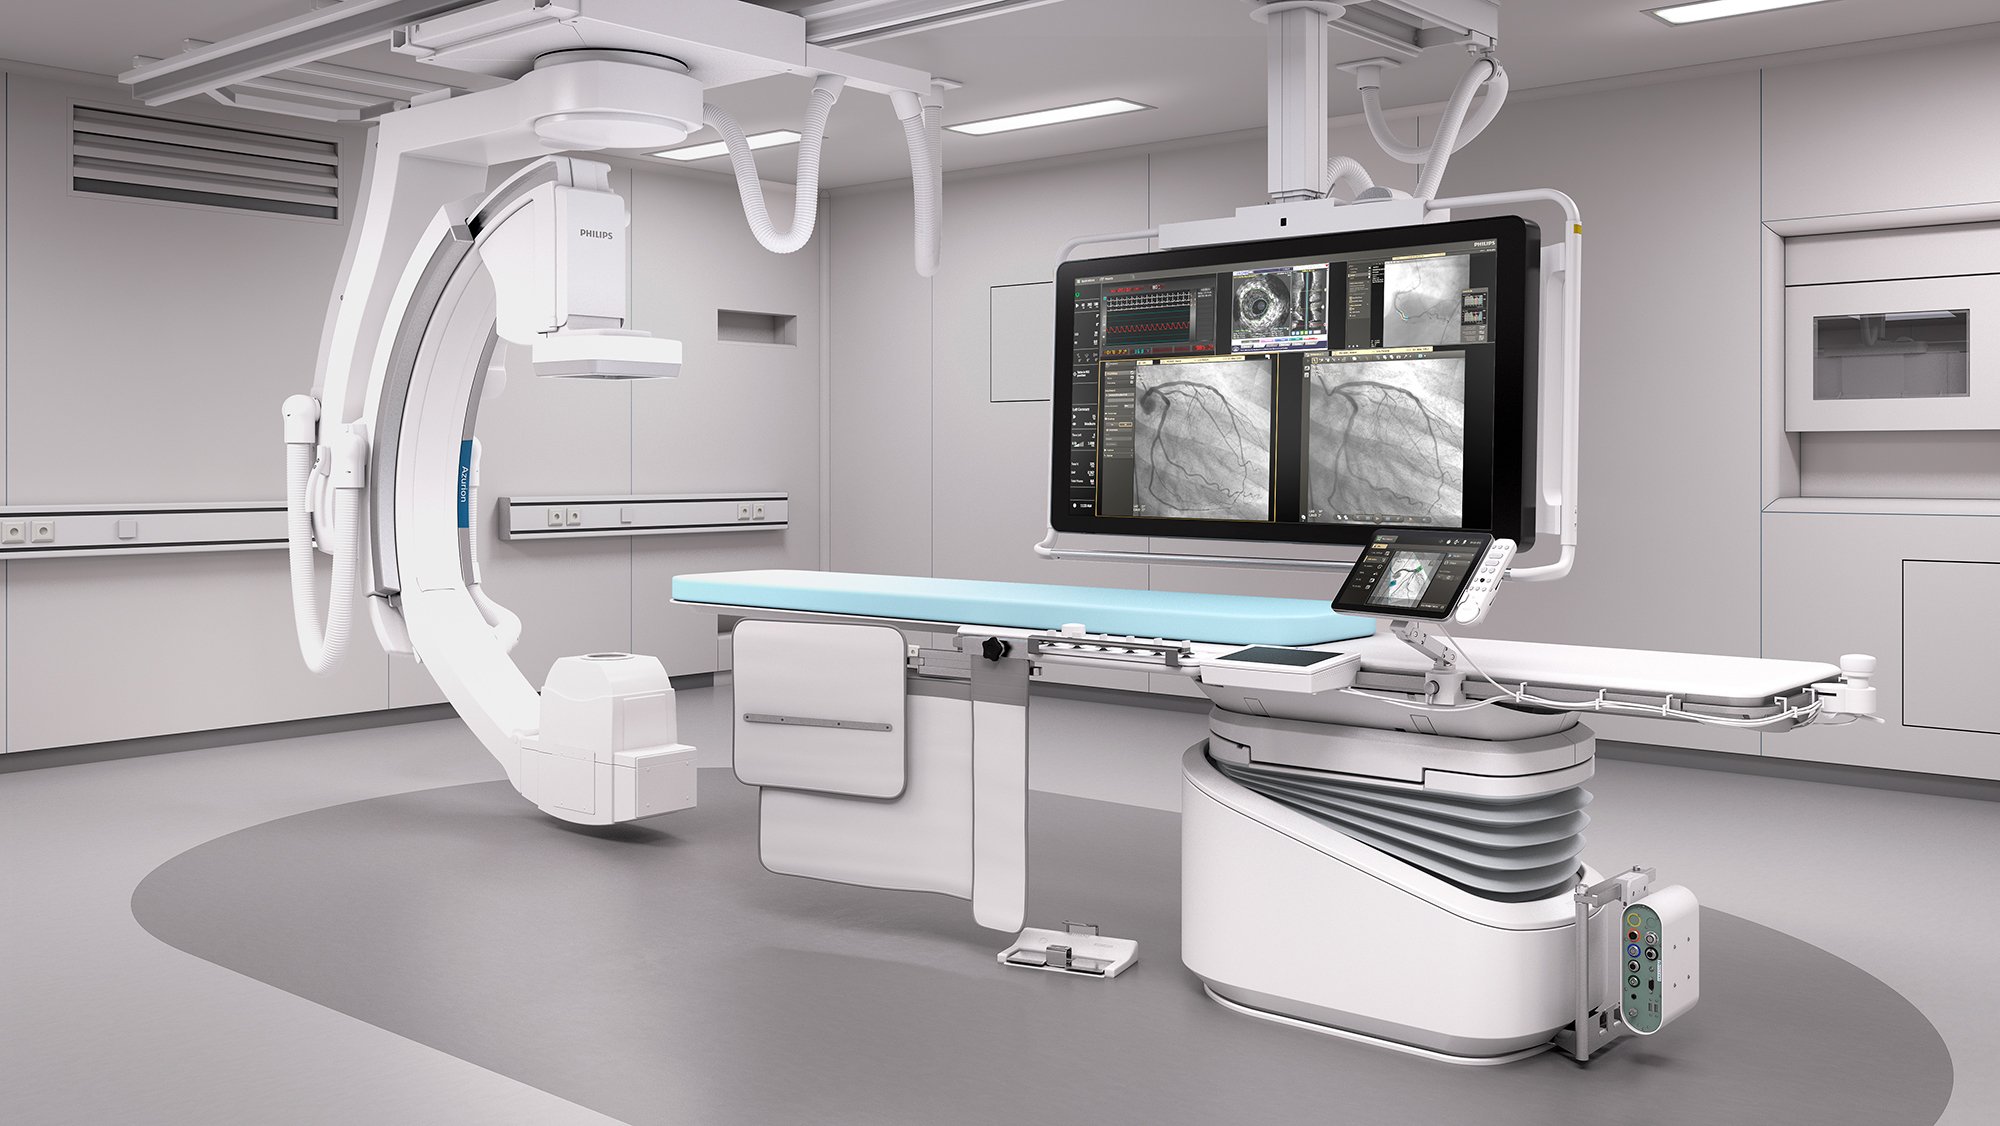 Philips provides the Allura Xper and AlluraClarity angiography imaging systems with ClarityIQ technologies